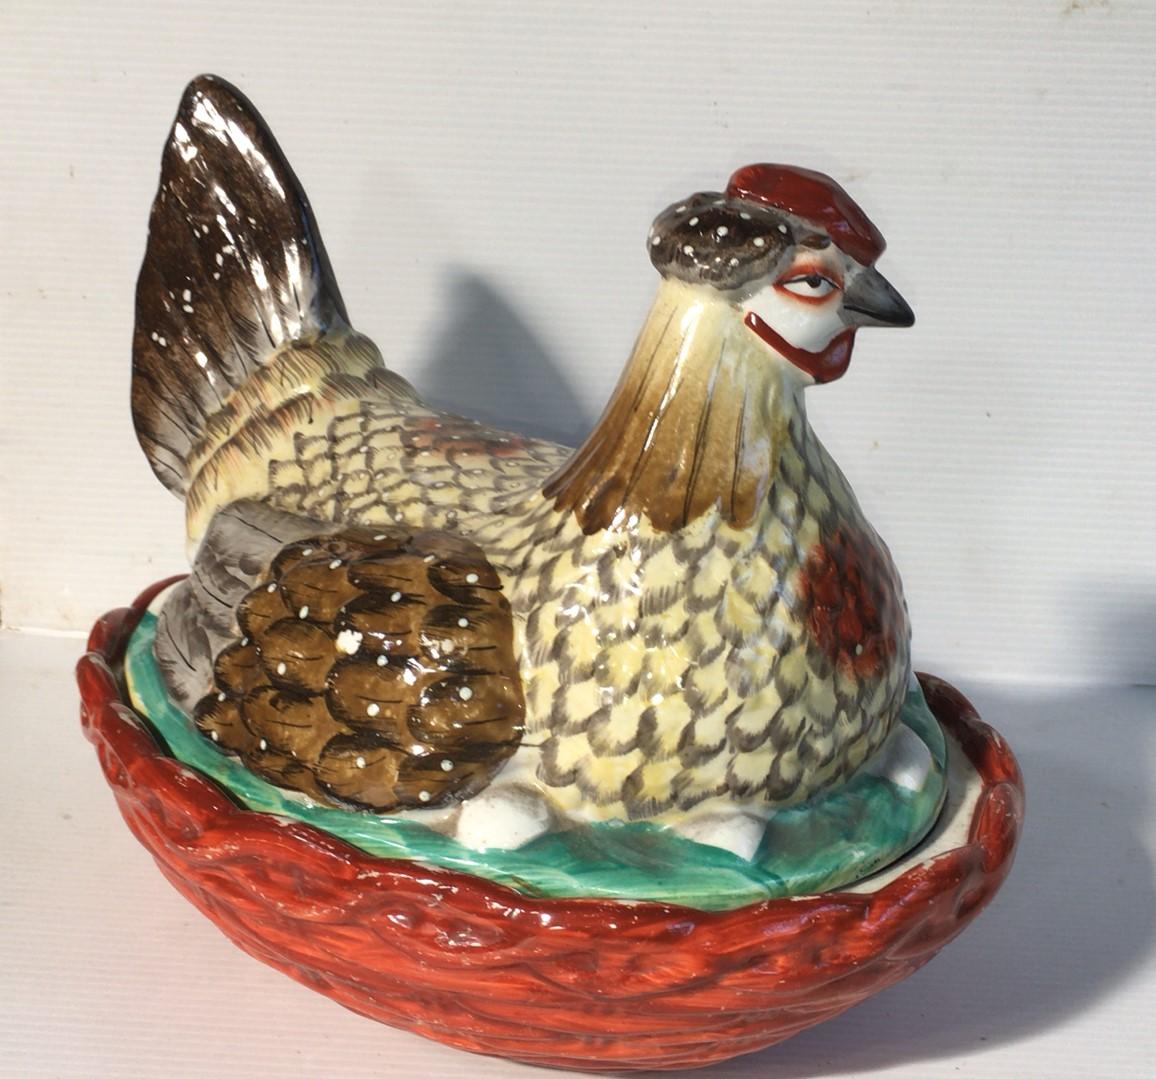 Colorful large 19th century Staffordshire hen on nest tureen with brown basket.
Measures: 10.5 inches Length.